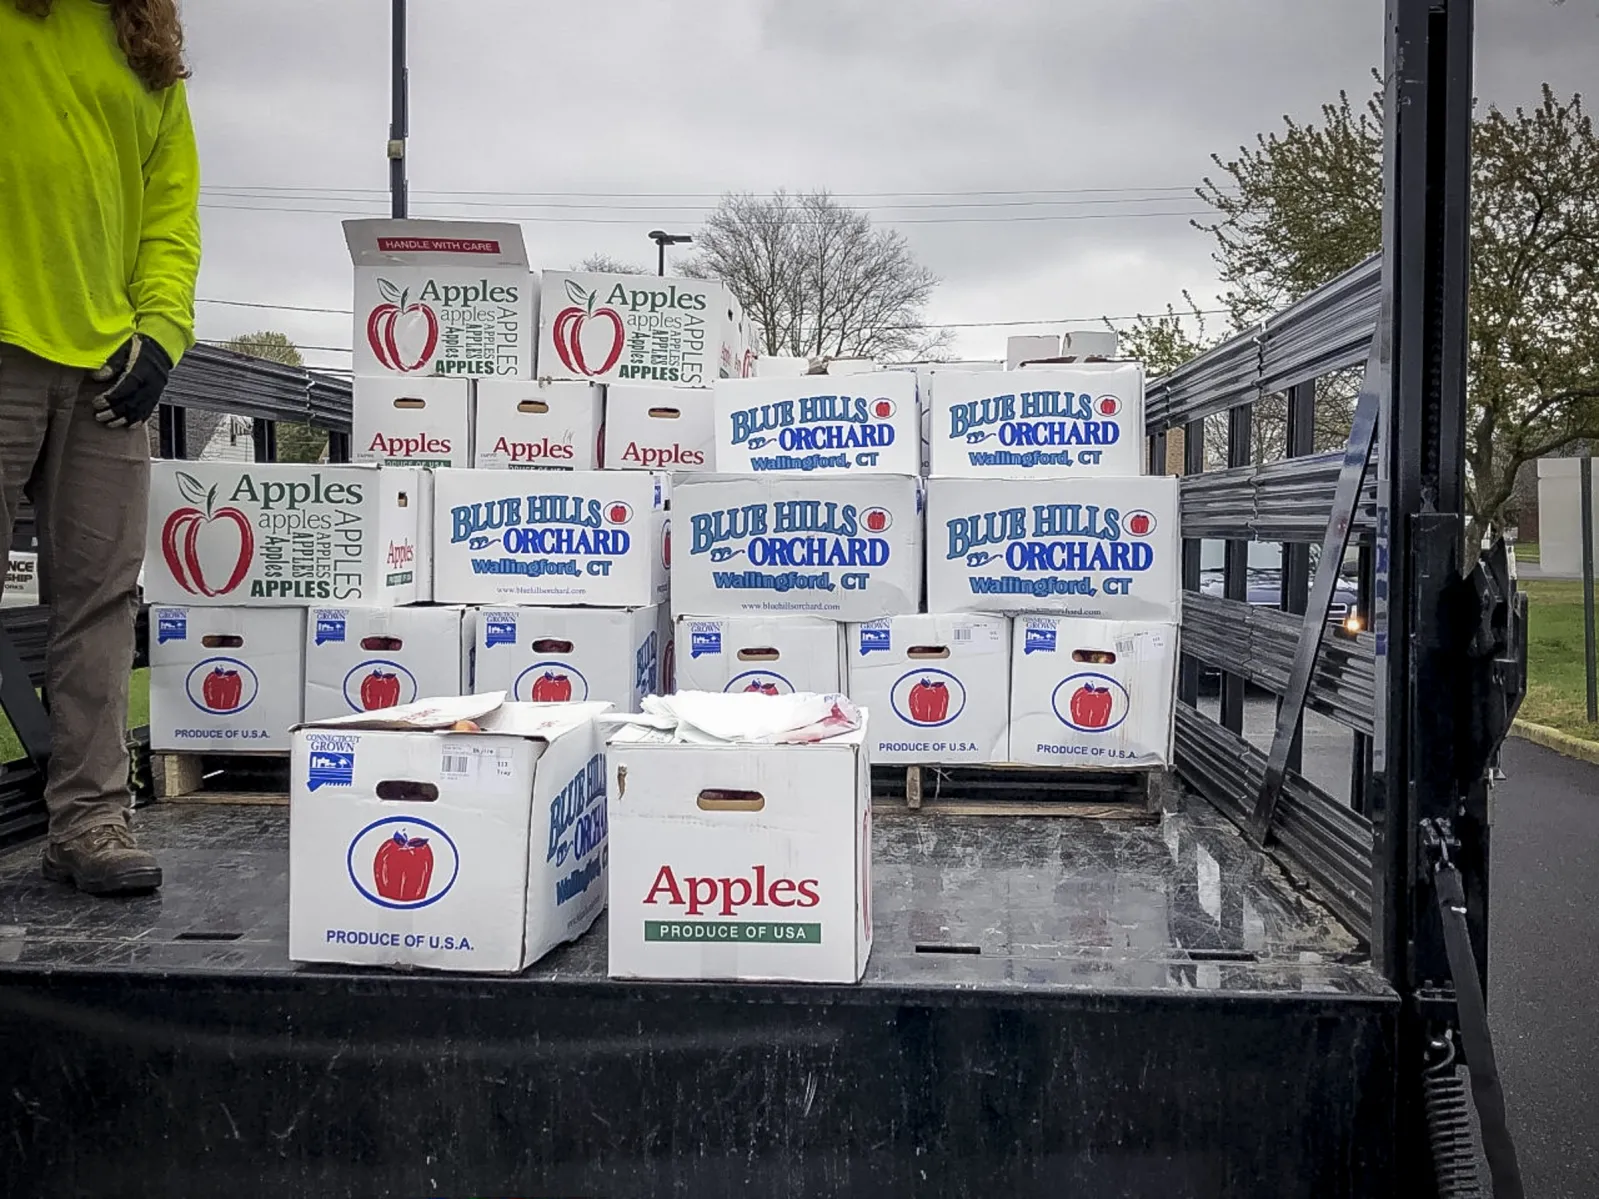 A truck bed carries boxes of donated apples for the school district.